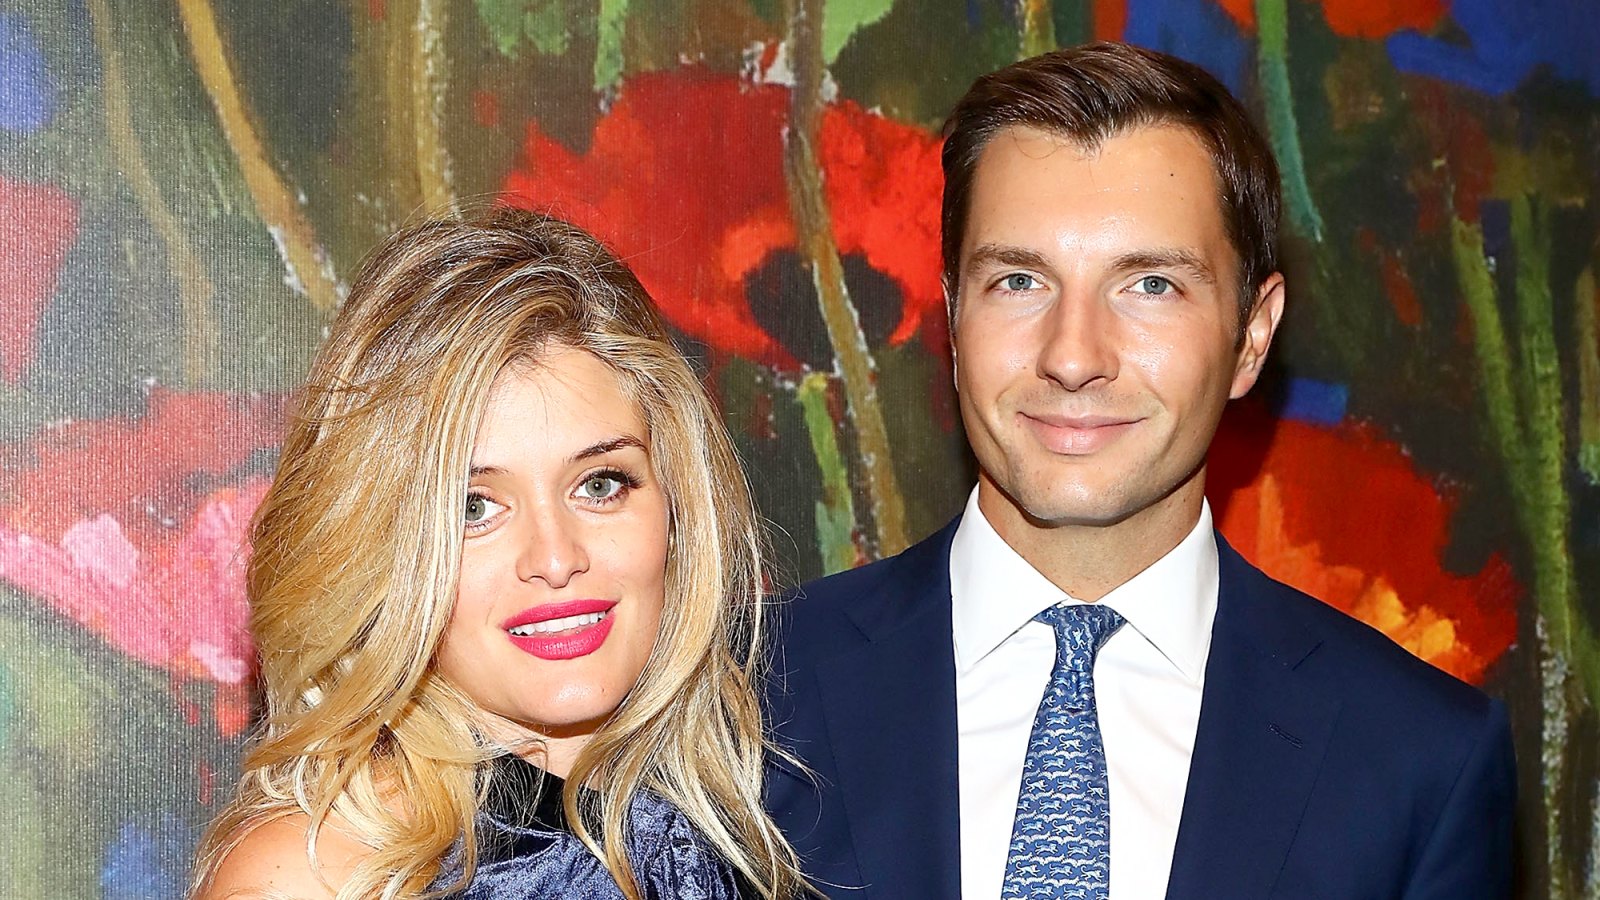 Daphne Oz and John Jovanovic attend 2017 'Take Home A Nude' art party and auction at Sotheby's in New York City.